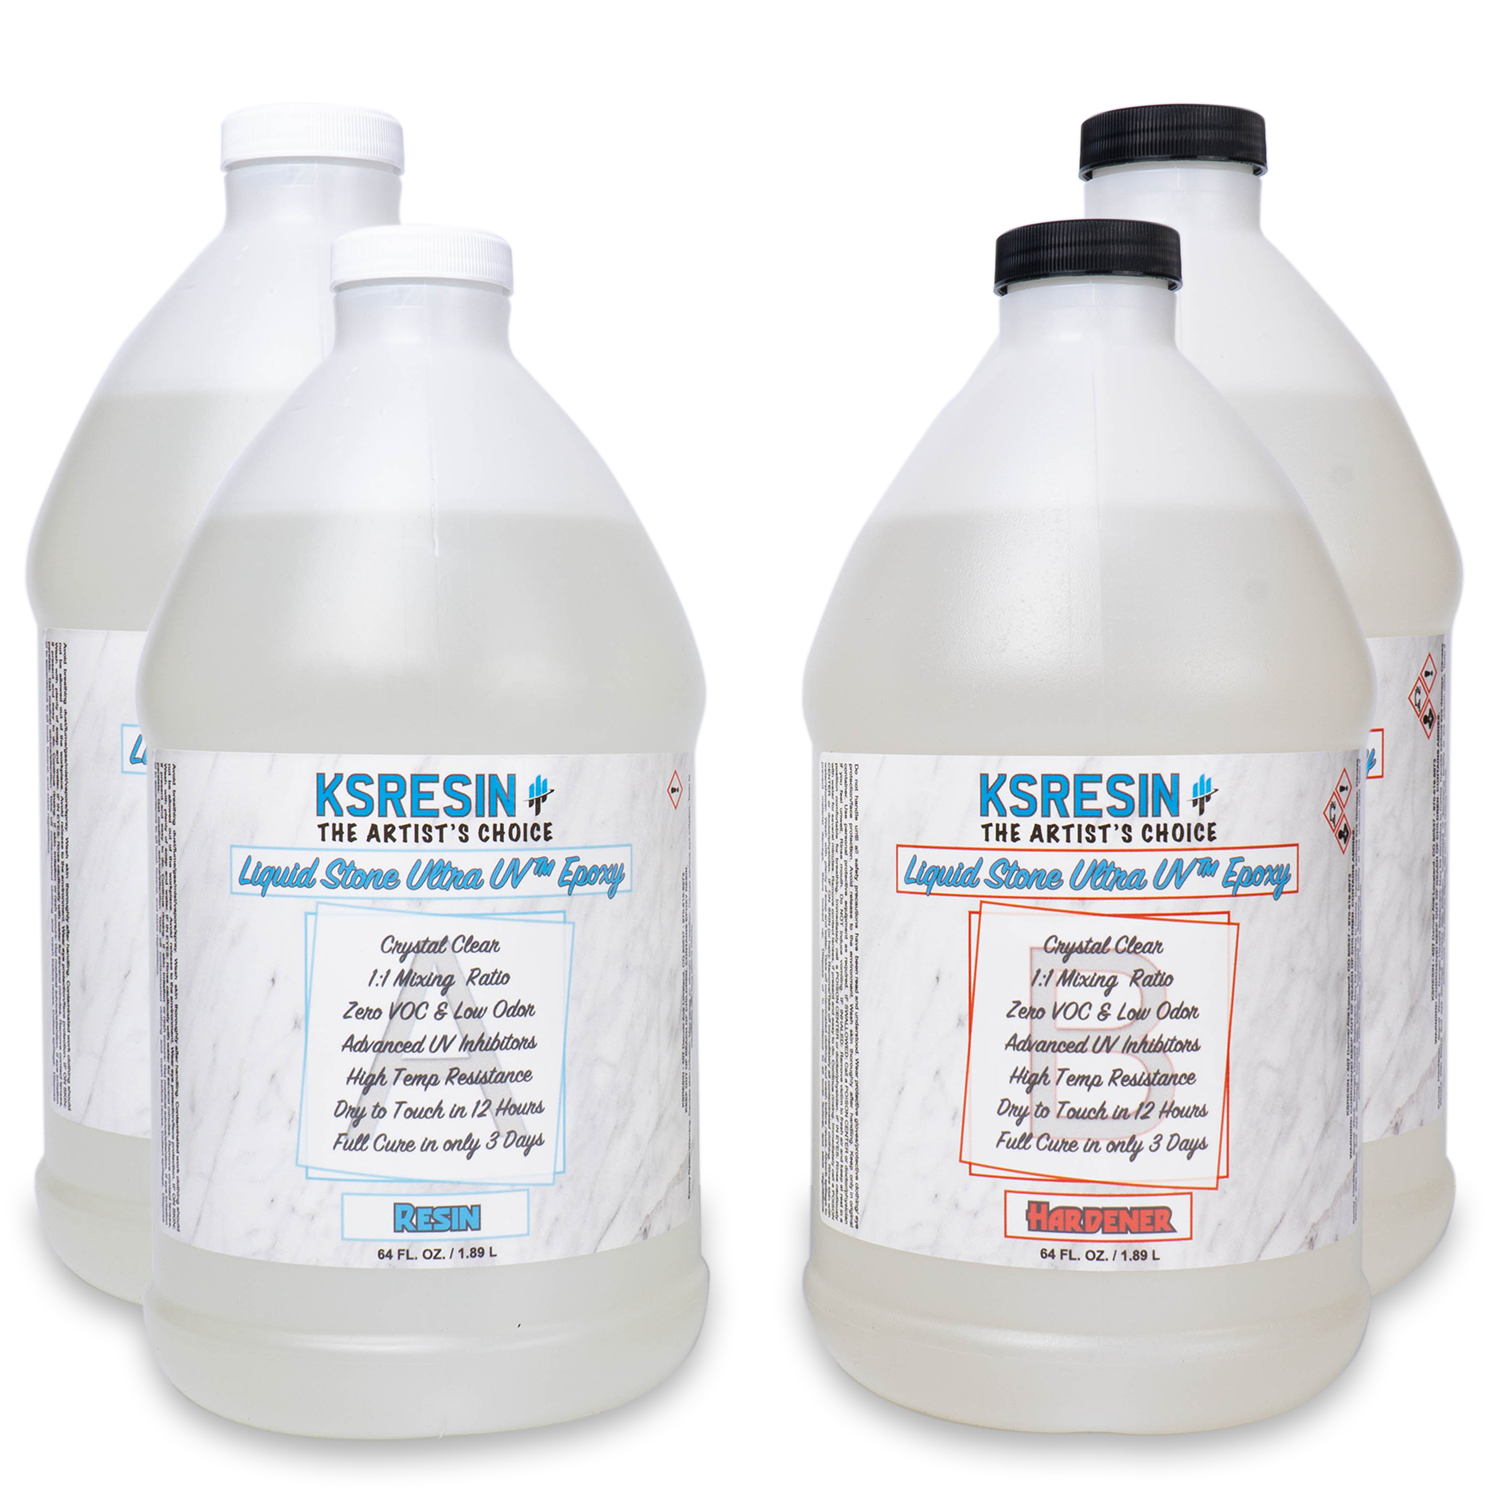 Tumblers Coating Epoxy Resin Kit | Clear High Gloss UV Resistant Coating System Two Gallon Kit